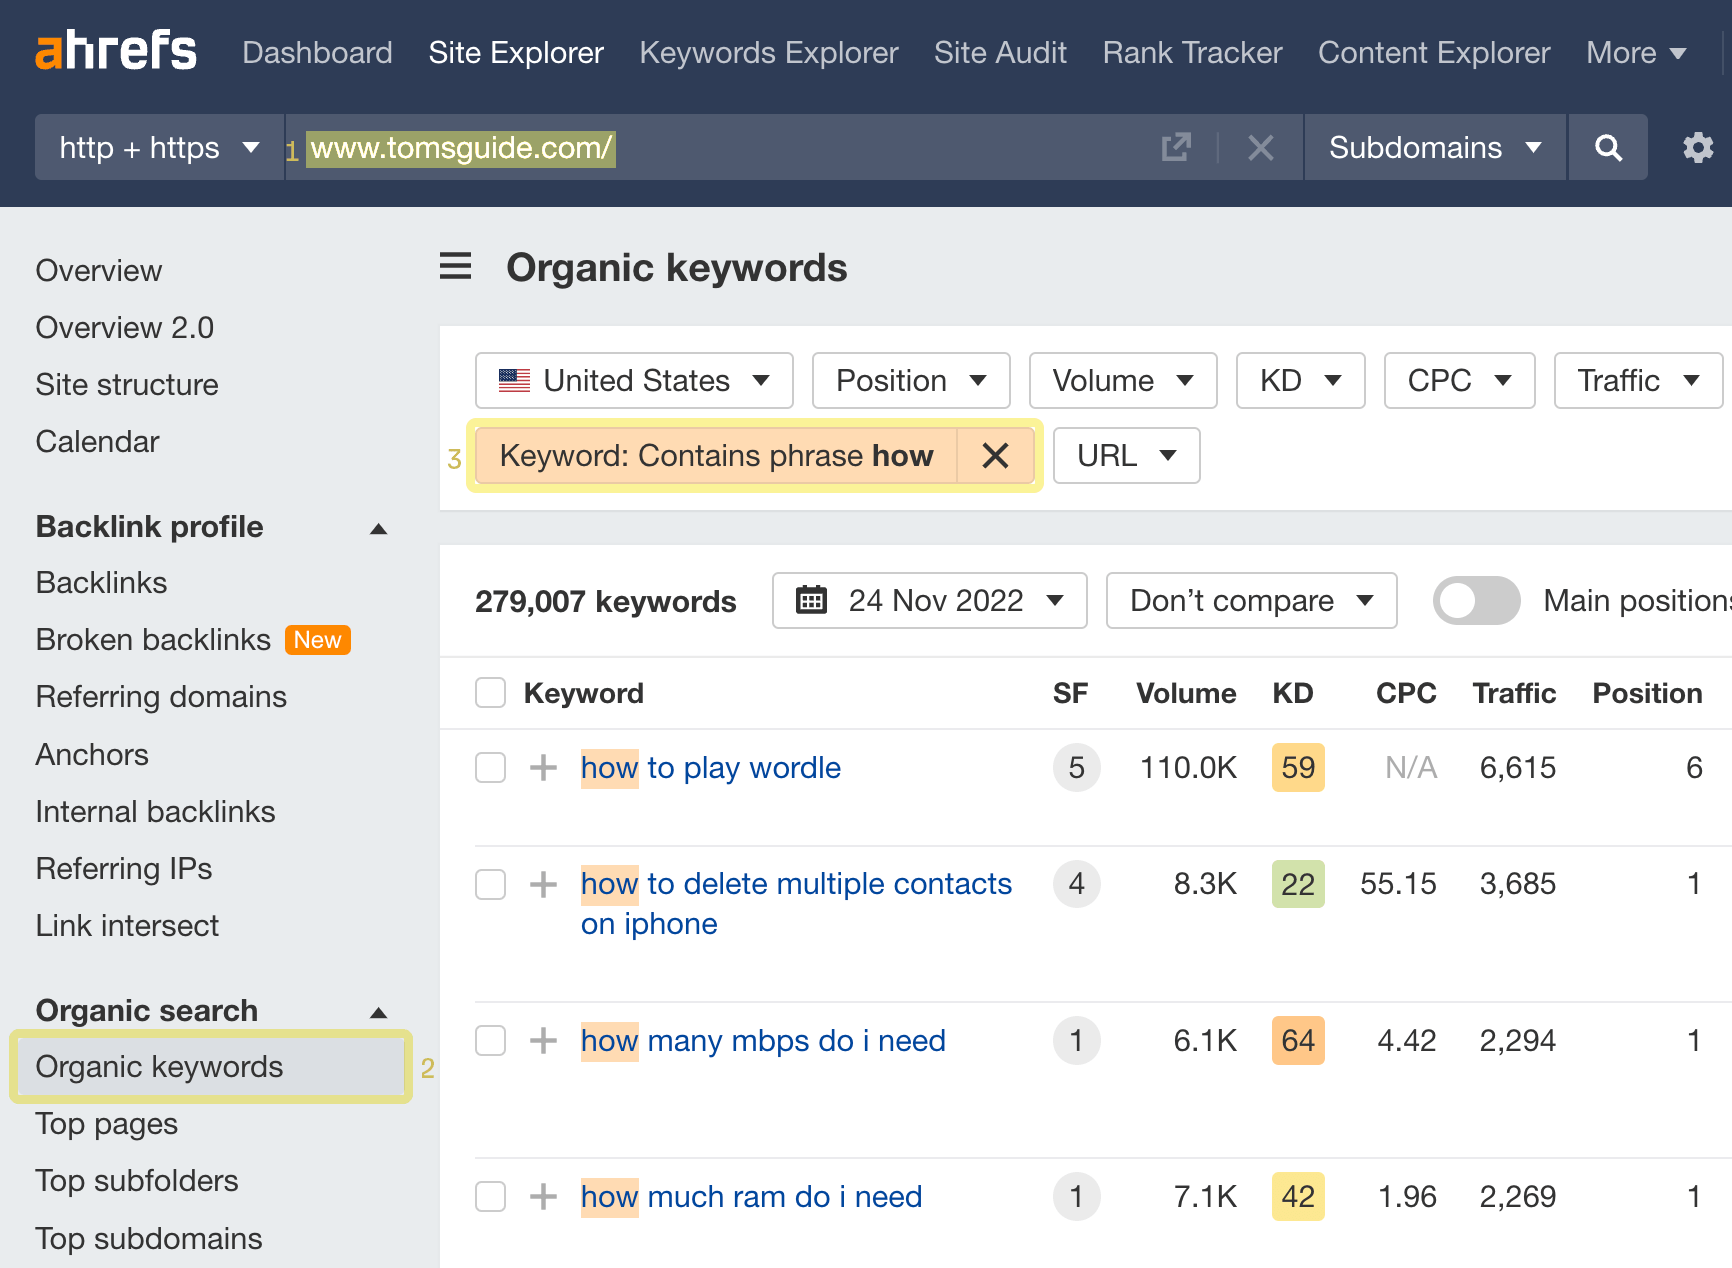 Analyzing competitor's keywords in Site Explorer